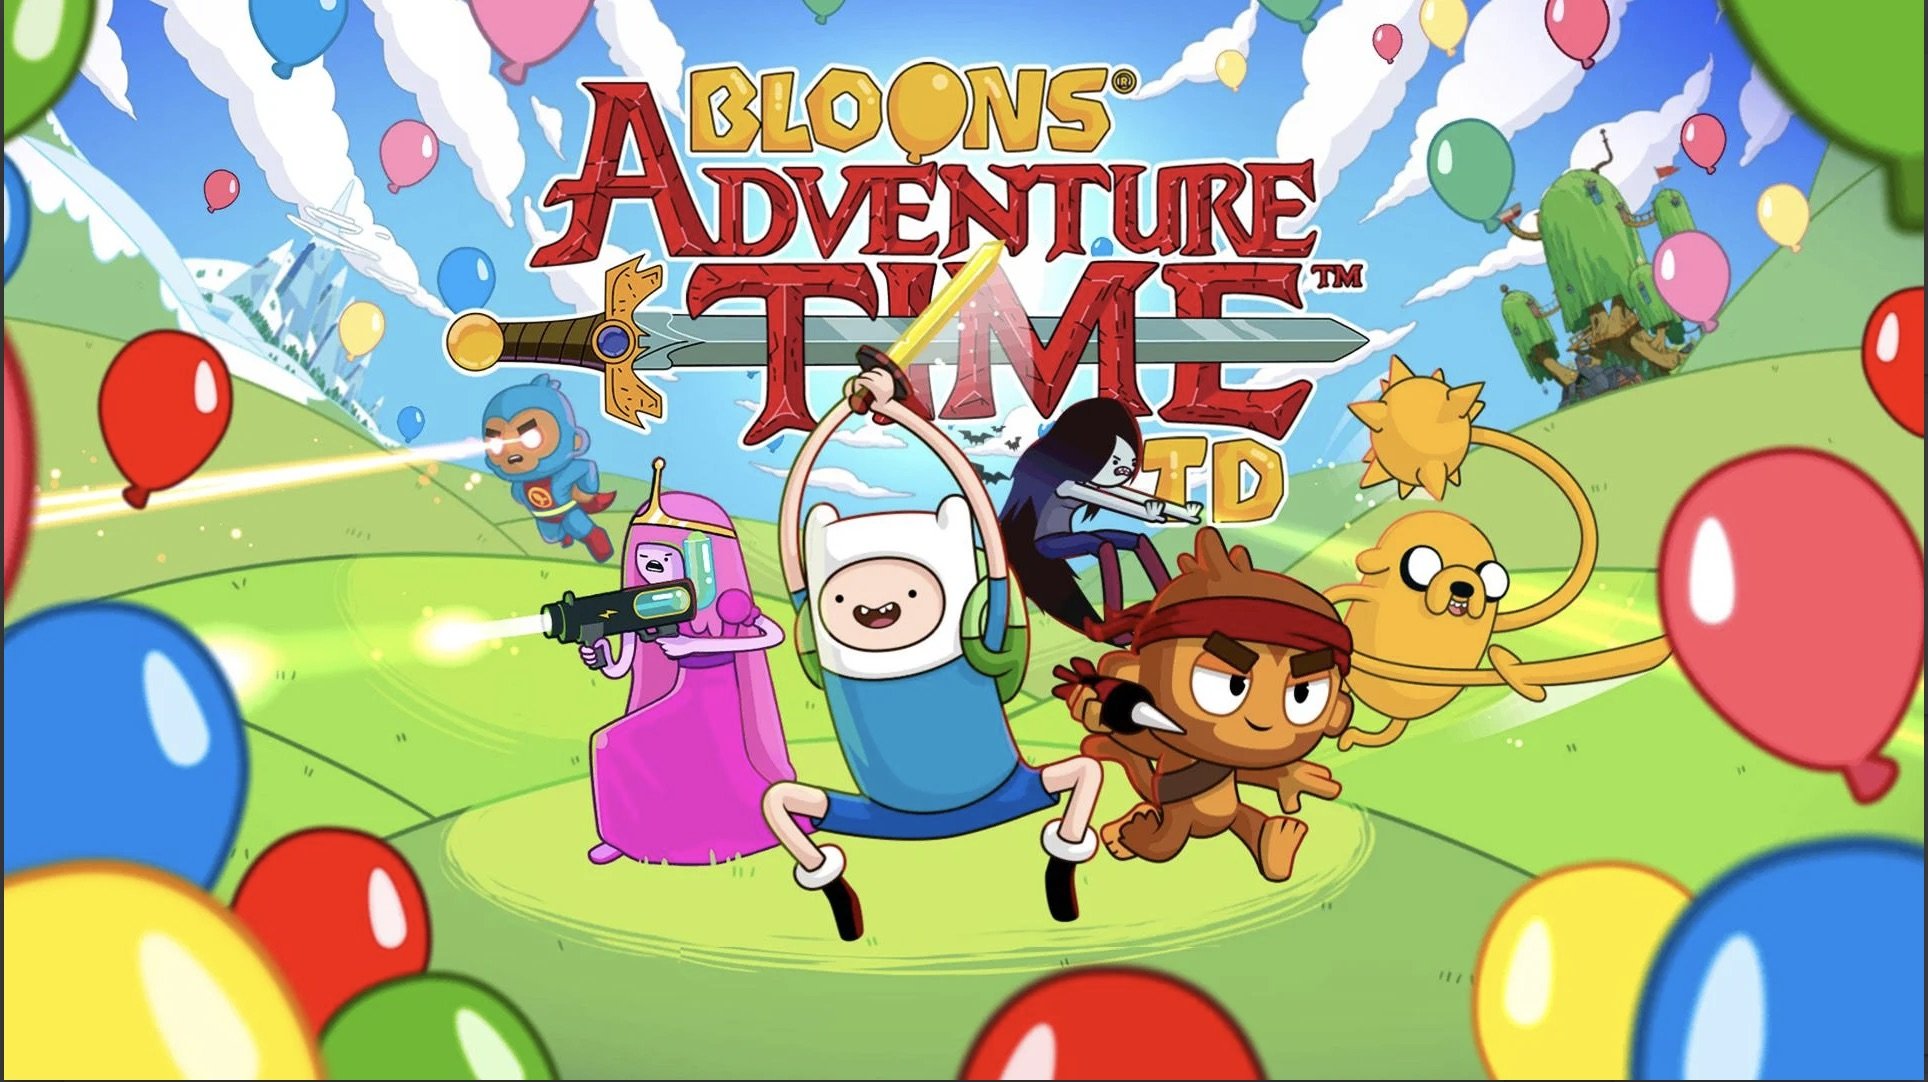 Bloons Adventure Time TD arriving August the 30th